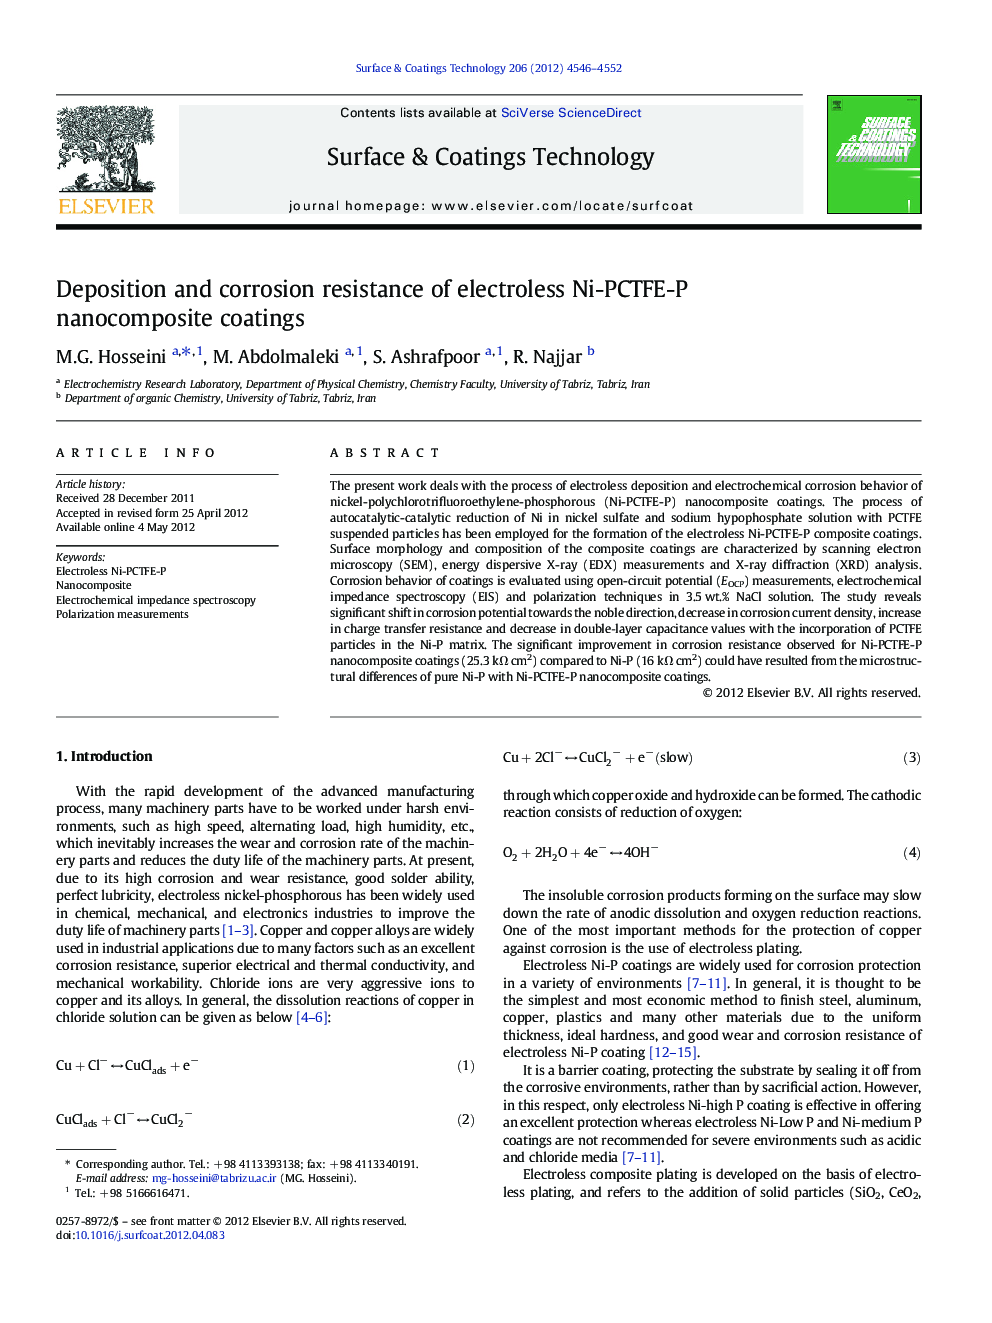 Deposition and corrosion resistance of electroless Ni-PCTFE-P nanocomposite coatings